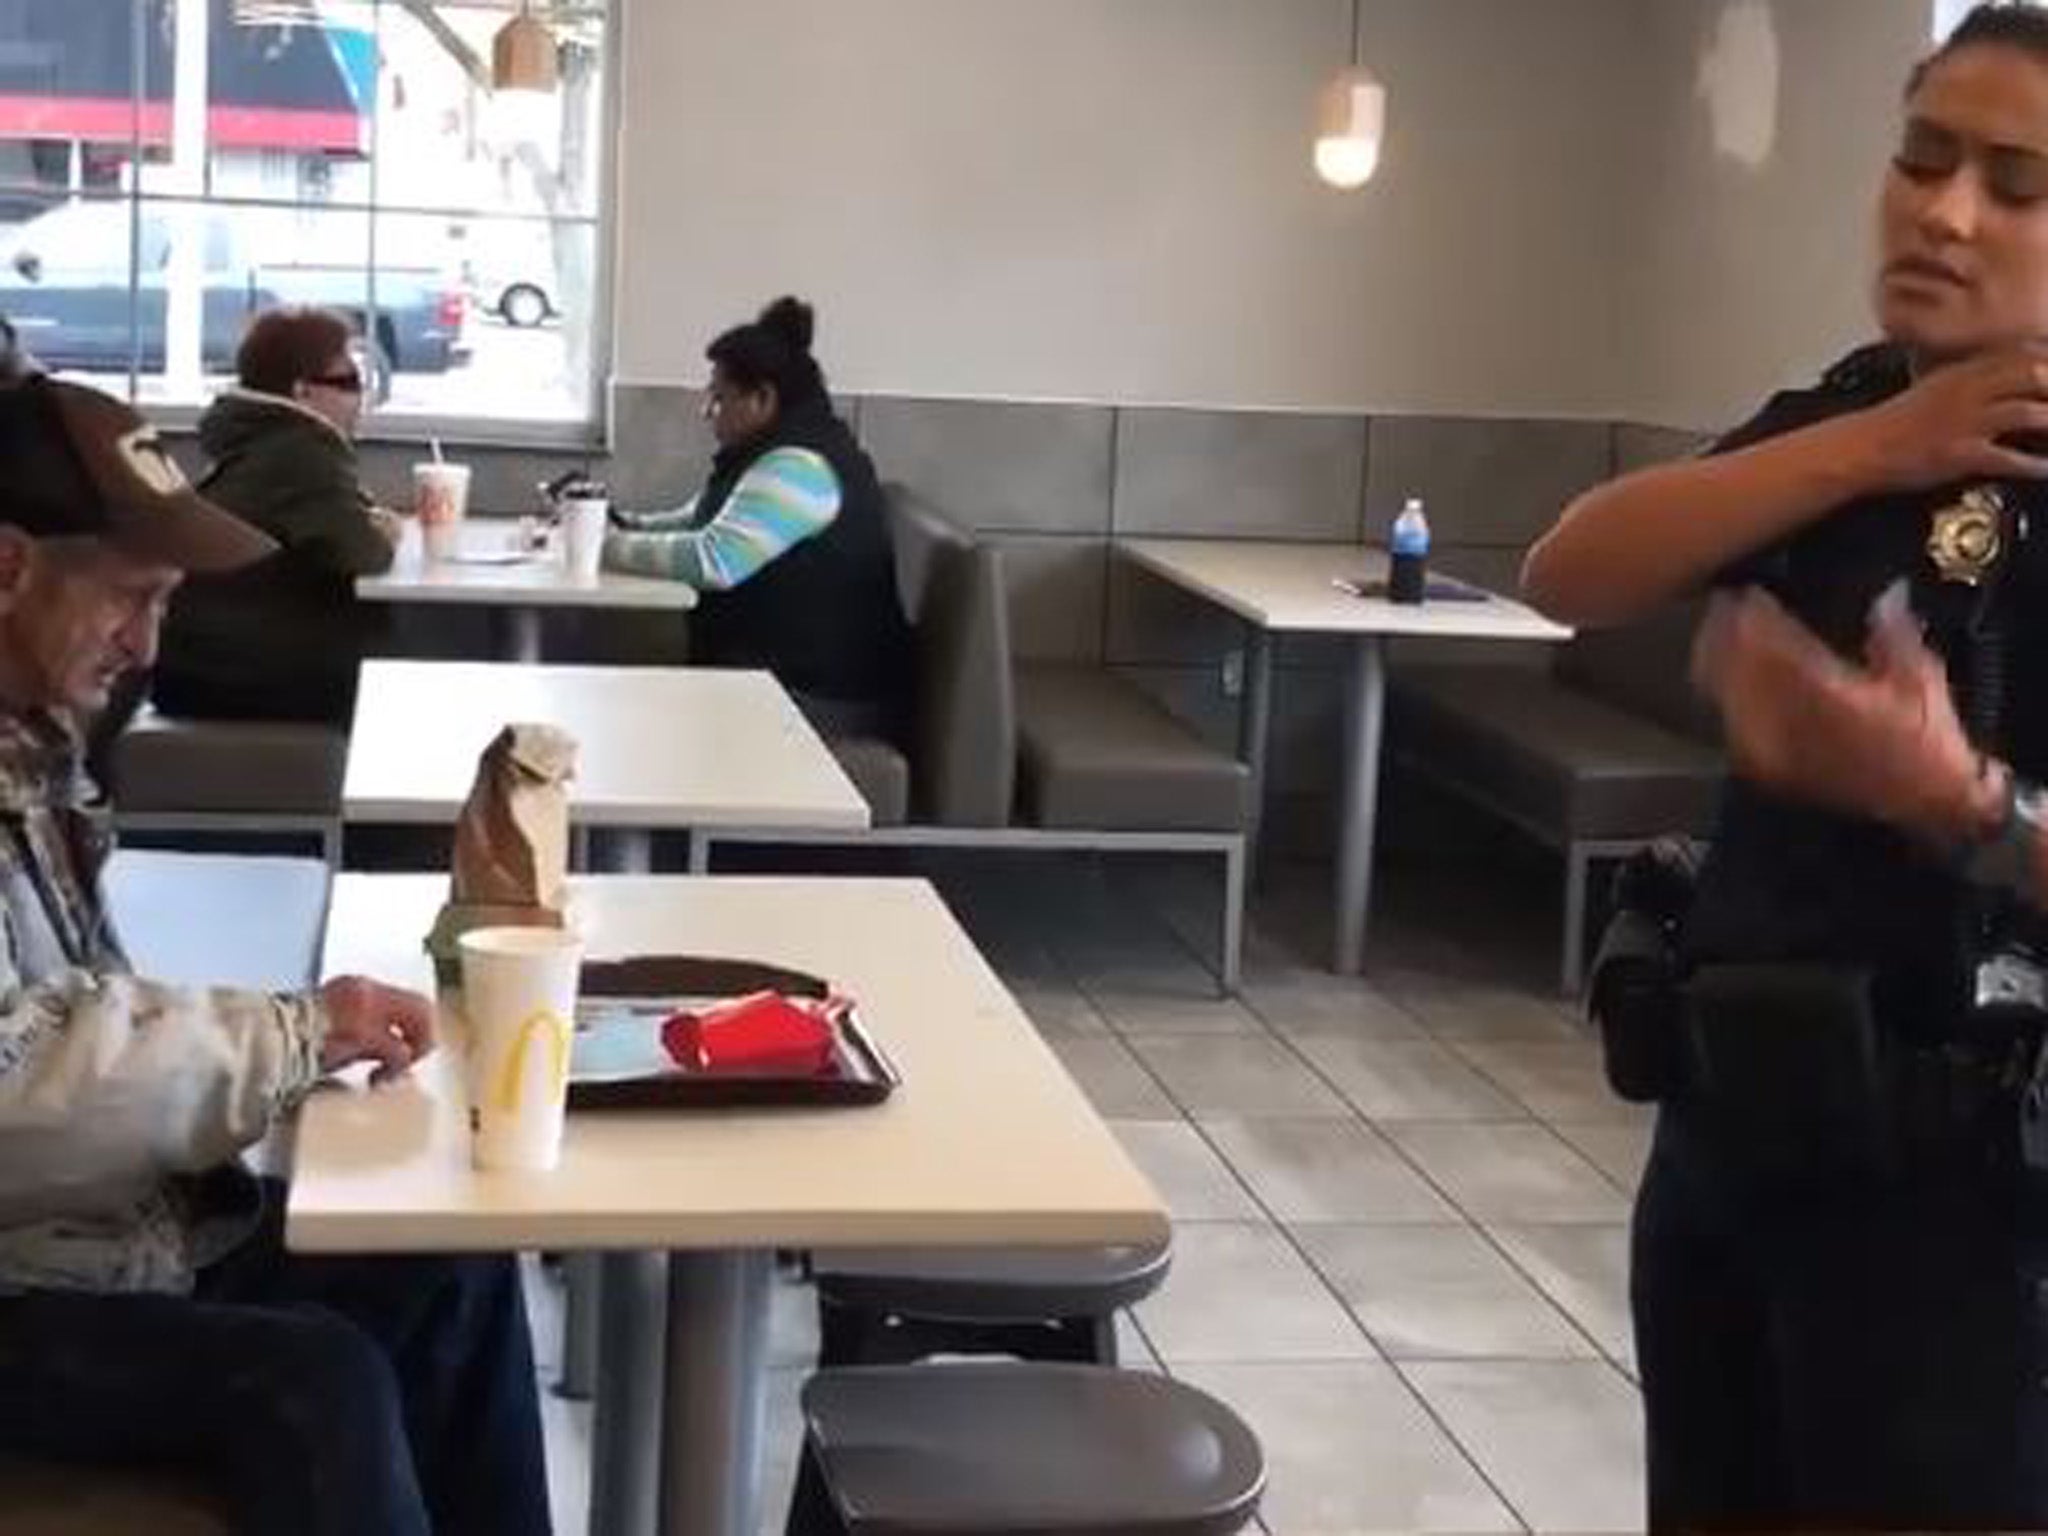 The police officer standing over the homeless man and asking him to leave the McDonald's